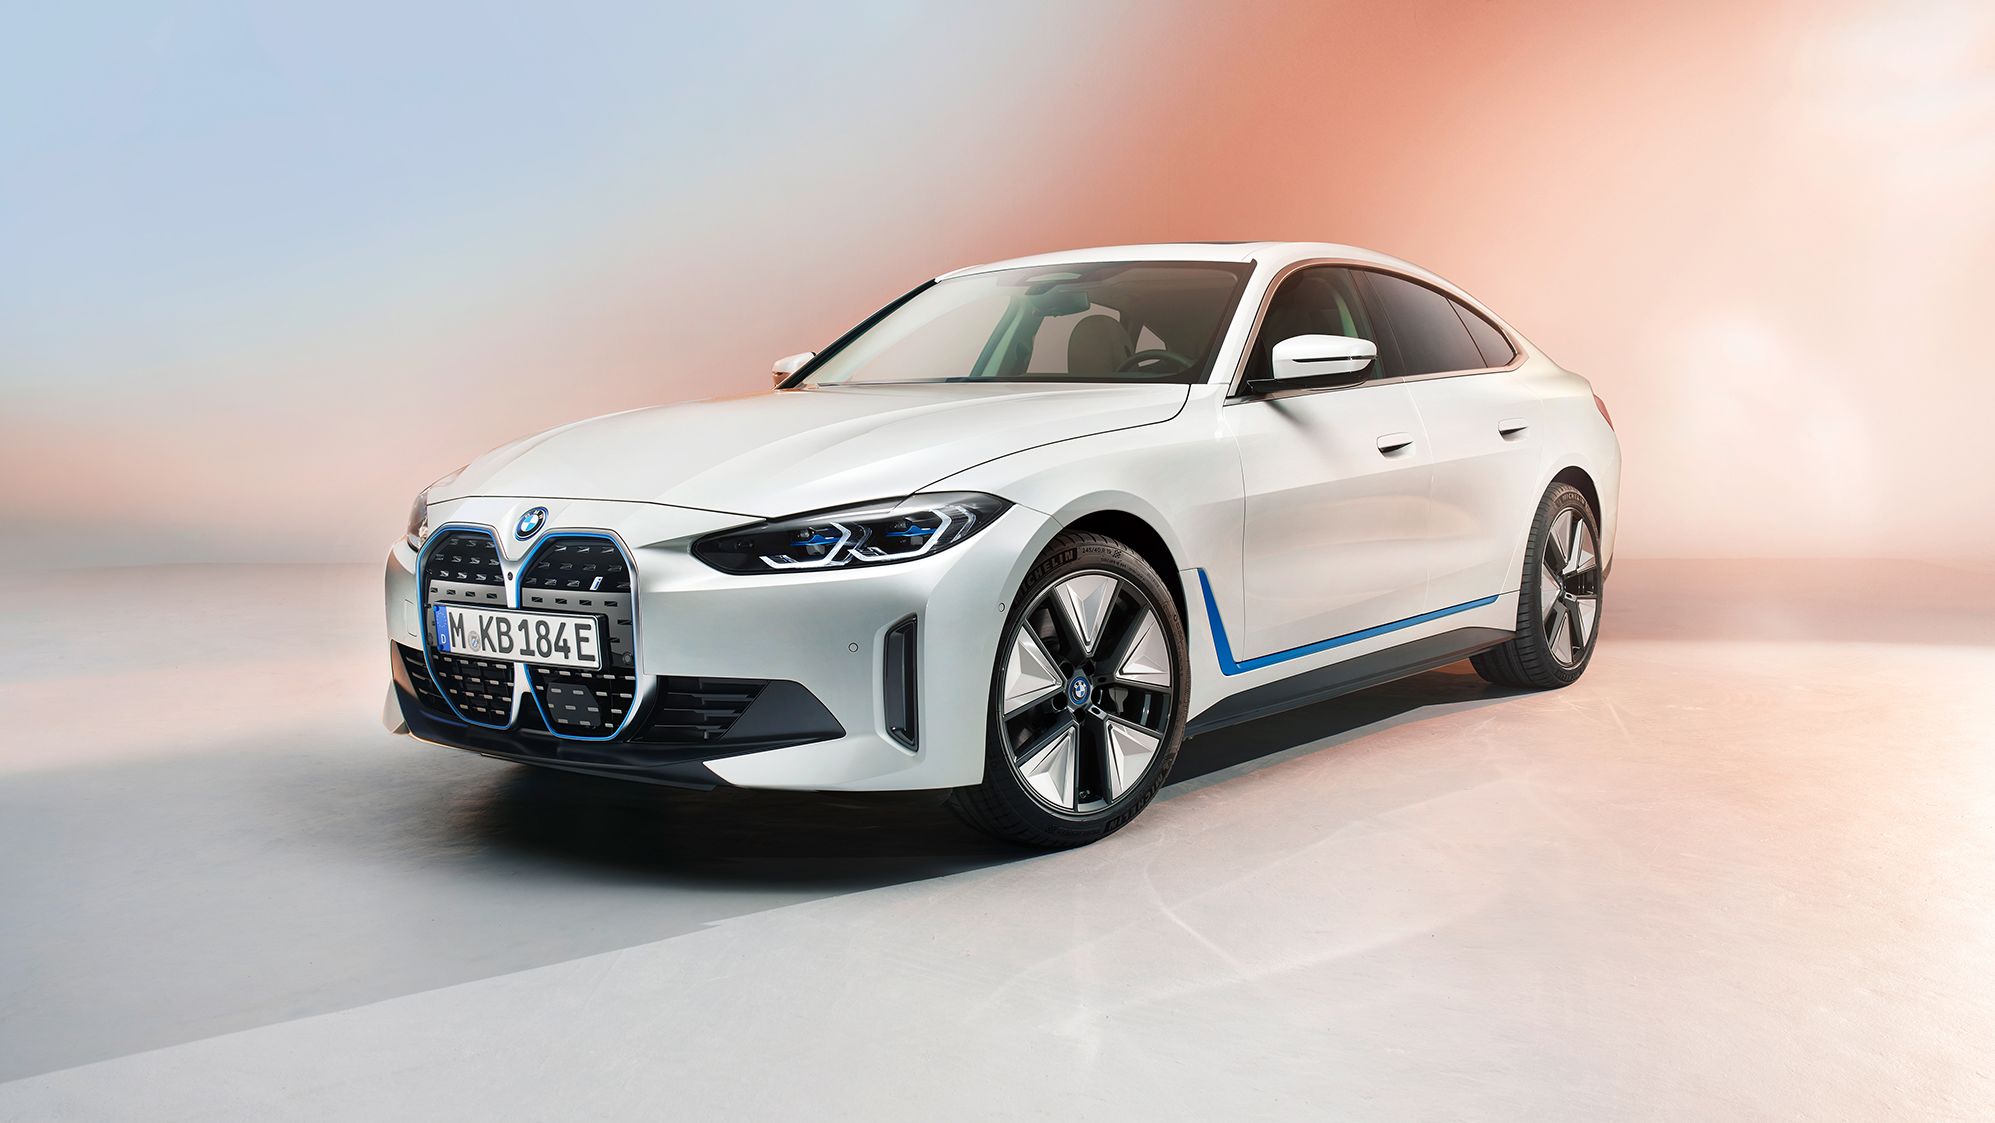 BMW Concept i4: Discover Highlights of the all-new BMW electric car